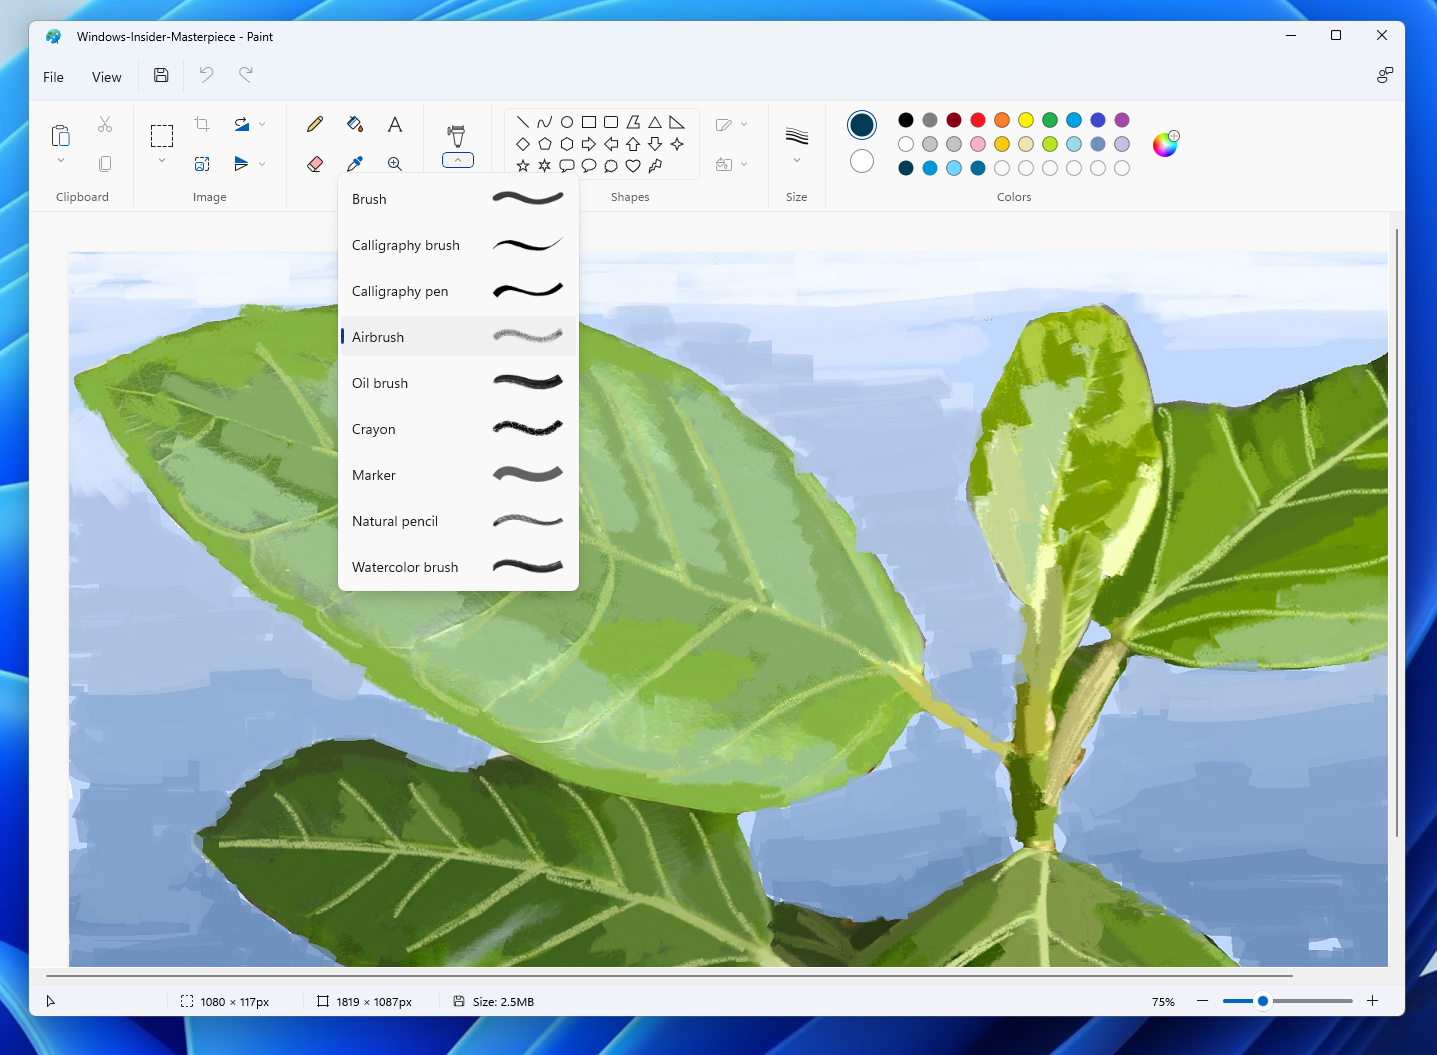 You can now ask Paint in Windows 11 to create artwork for you